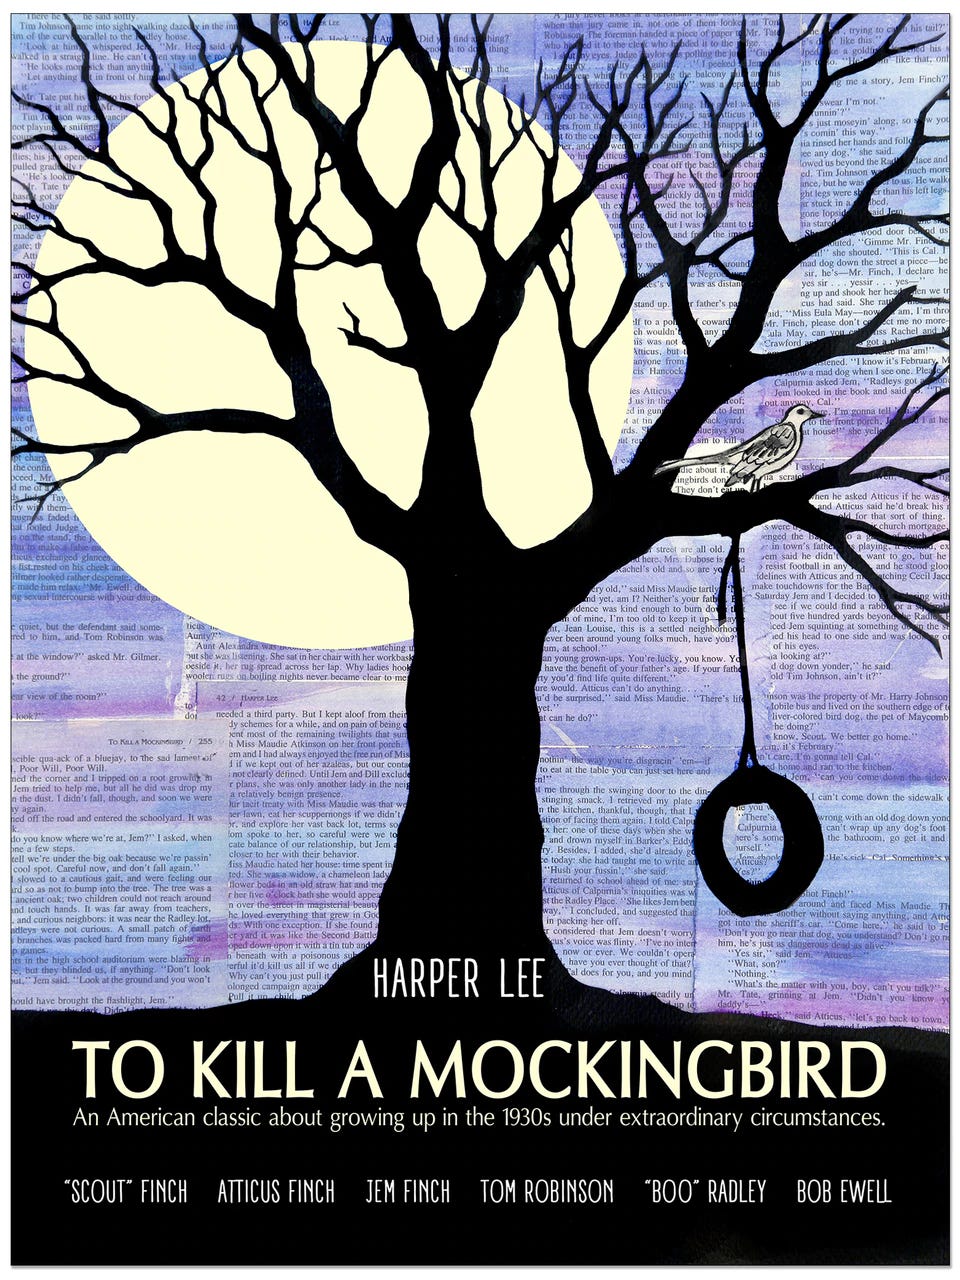 To Kill A Mockingbird by Harper Lee-My Thoughts, by The Volatile Brain